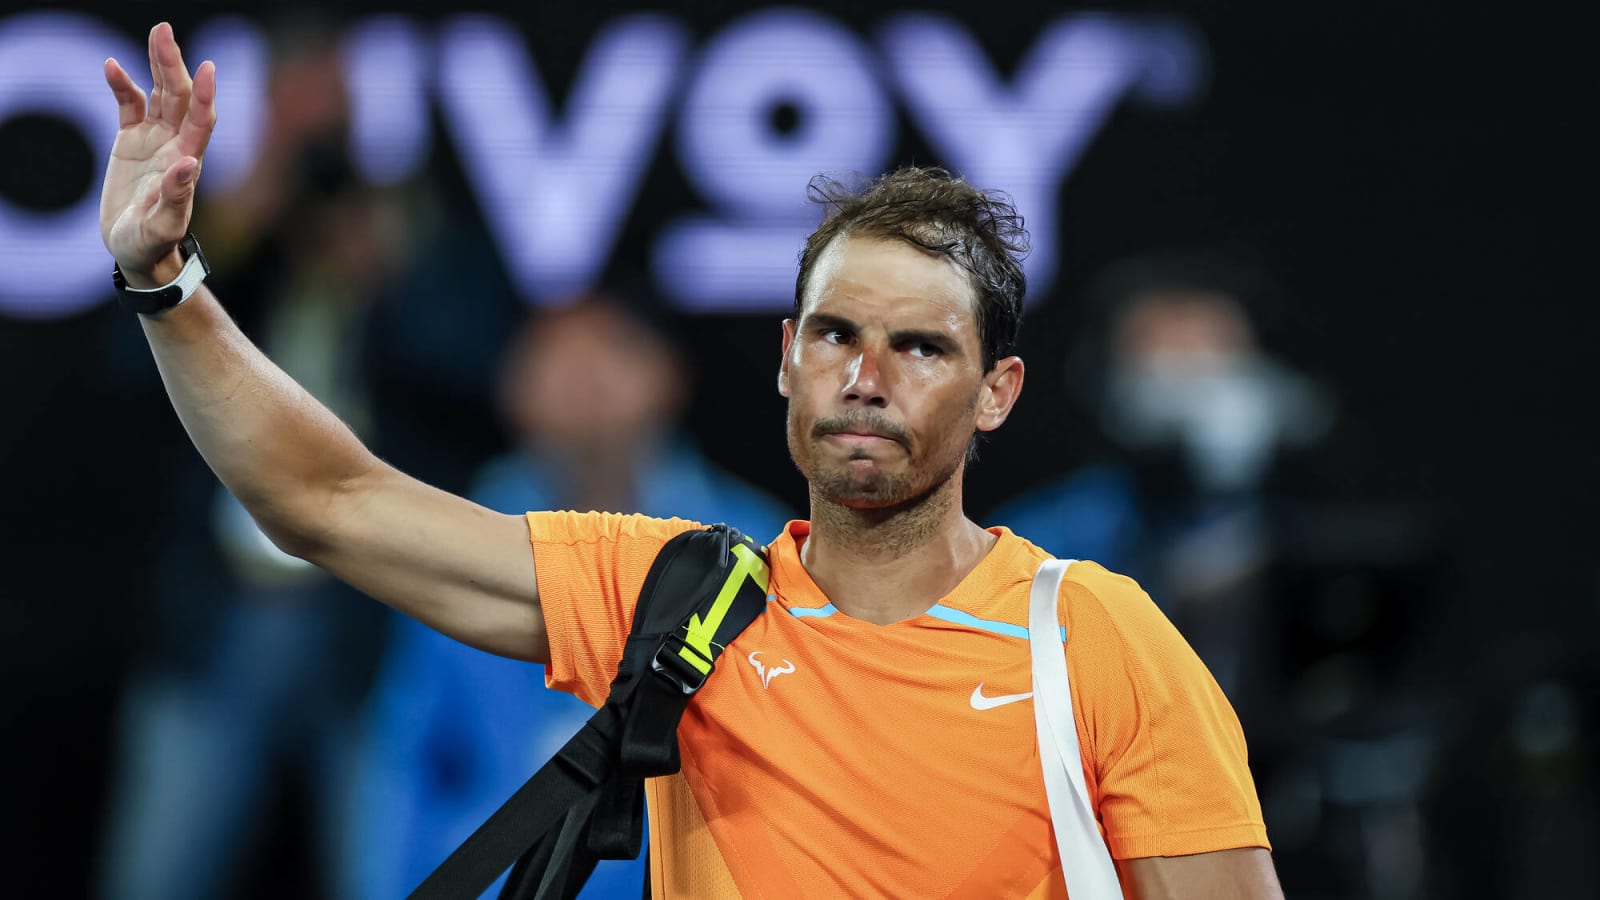 Watch: Even Rafael Nadal can’t resist! Spanish Maestro asks for a Real Madrid update during his fourth-round clash against Jiri Lehecka